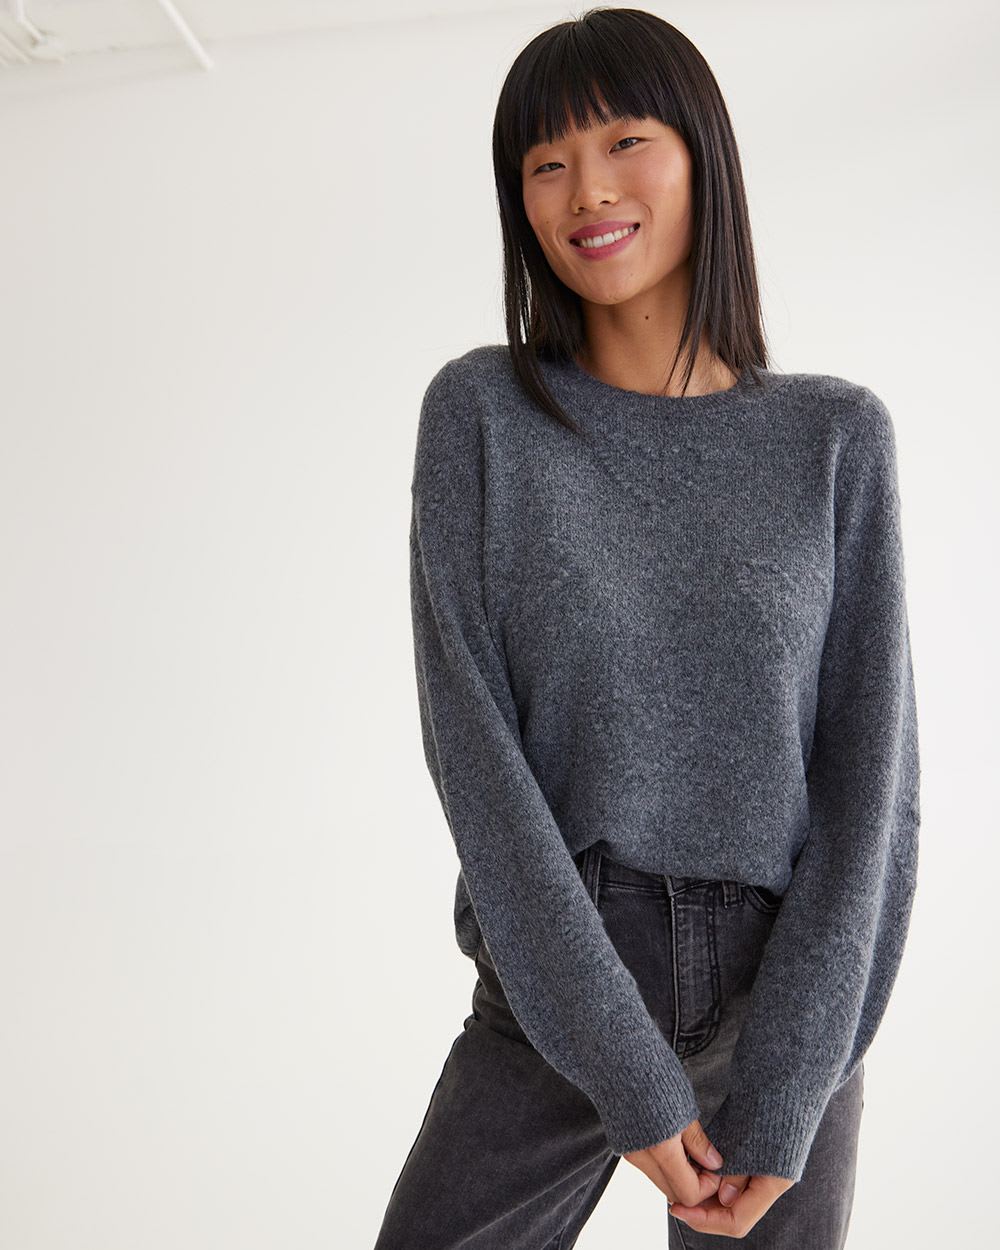 Long-Sleeve Crew Neck Pullover with Popcorn Stitch